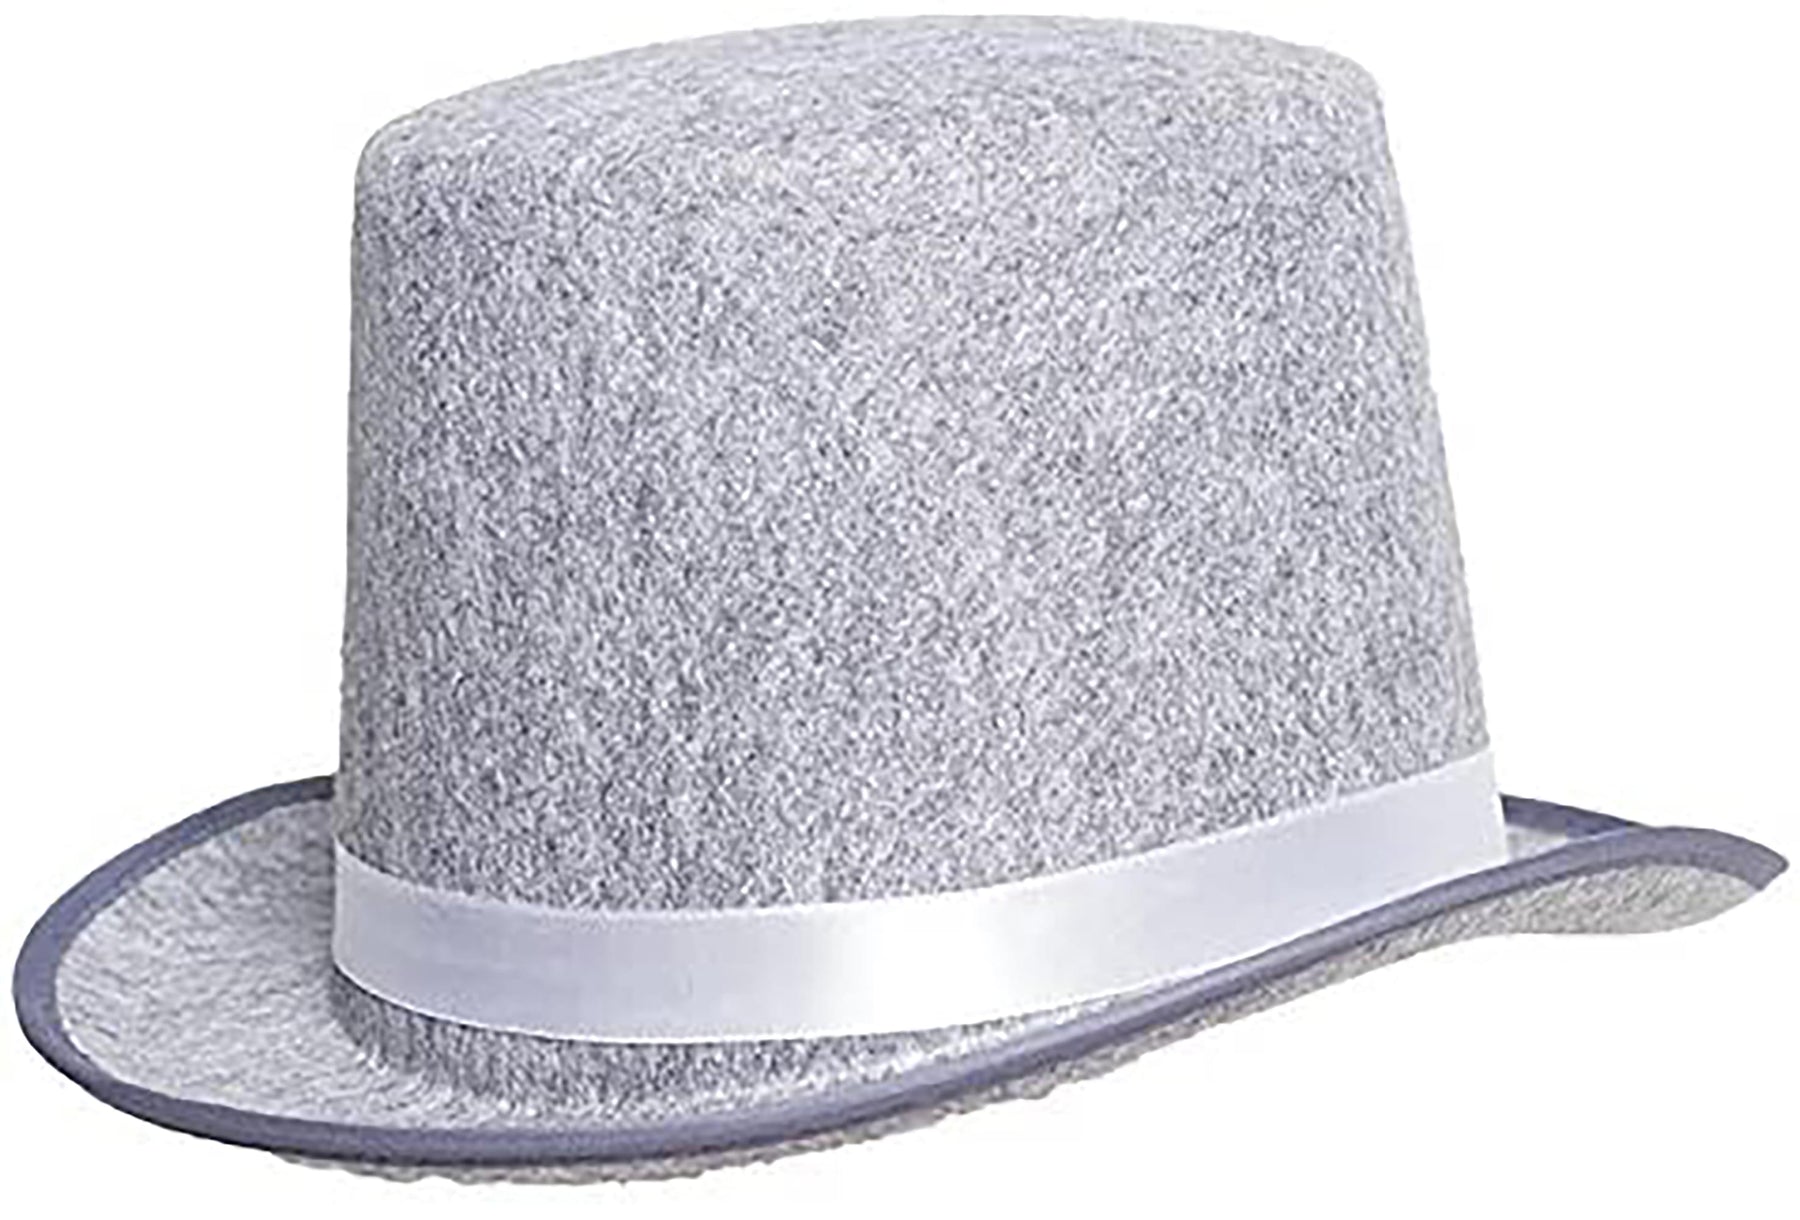 Grey Top Hat Adult Costume Accessory